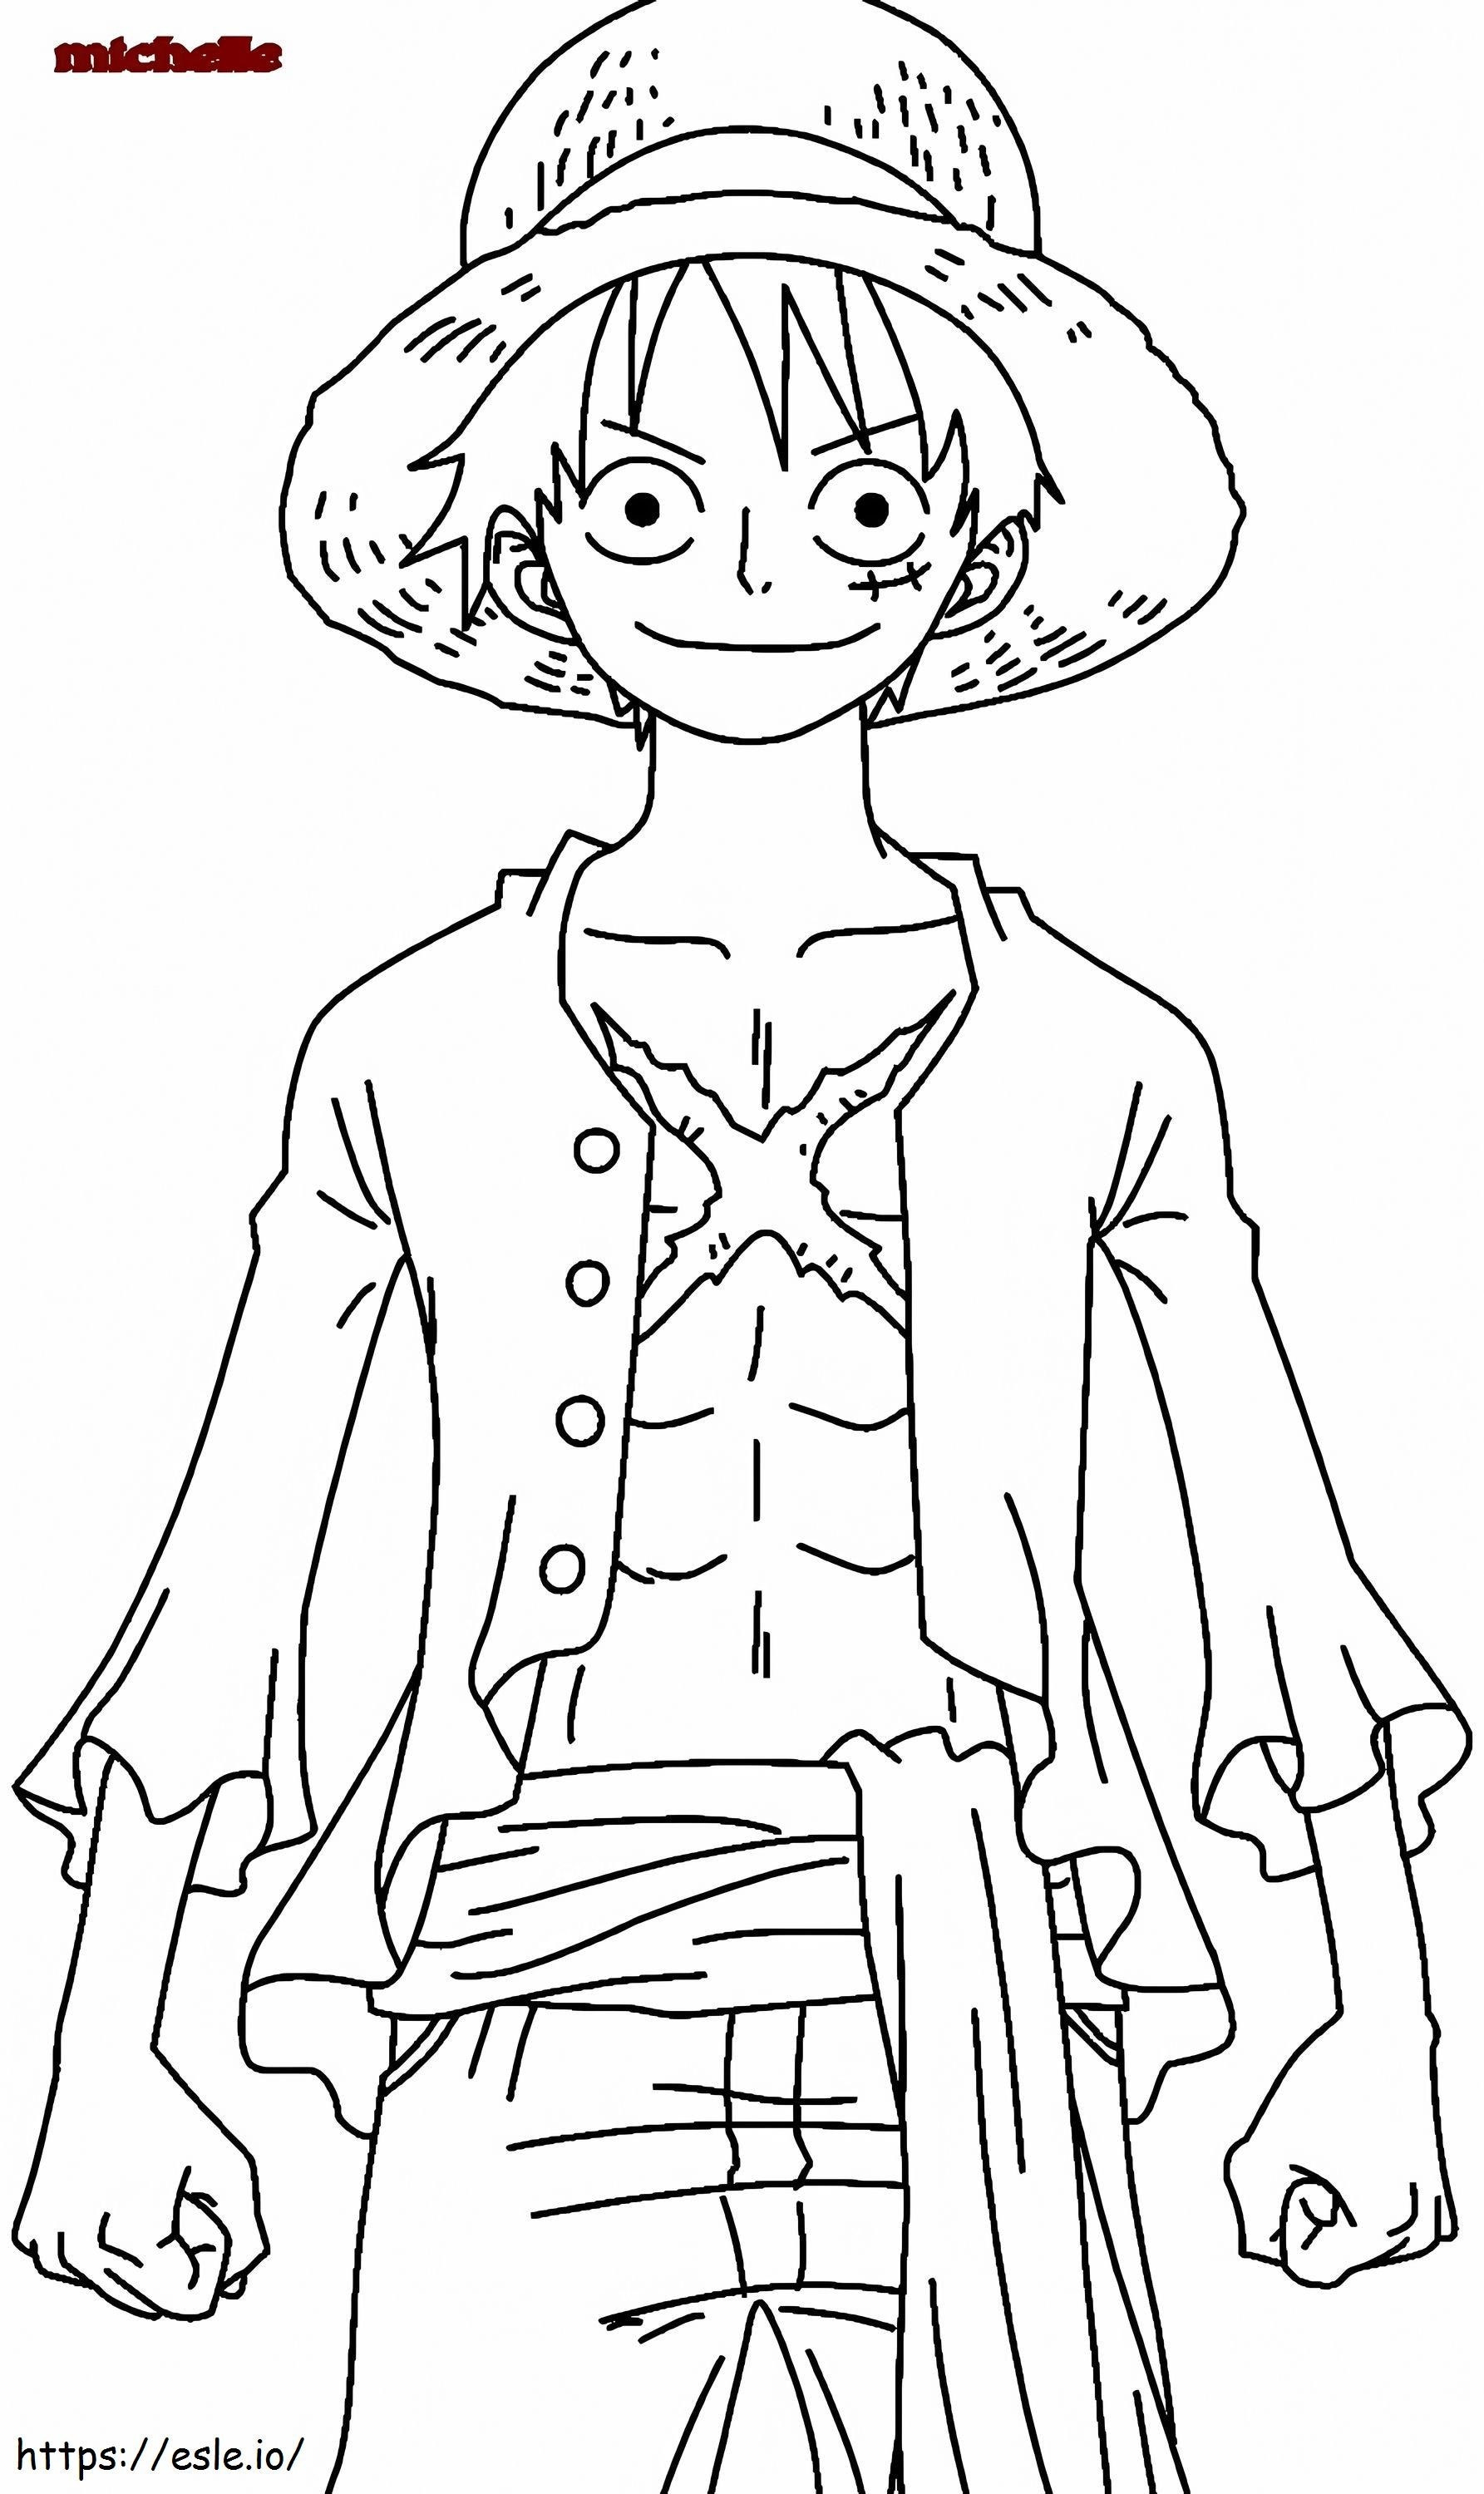 Awesome Of One Piece Pics Monkey D Luffy Pinterest coloring page